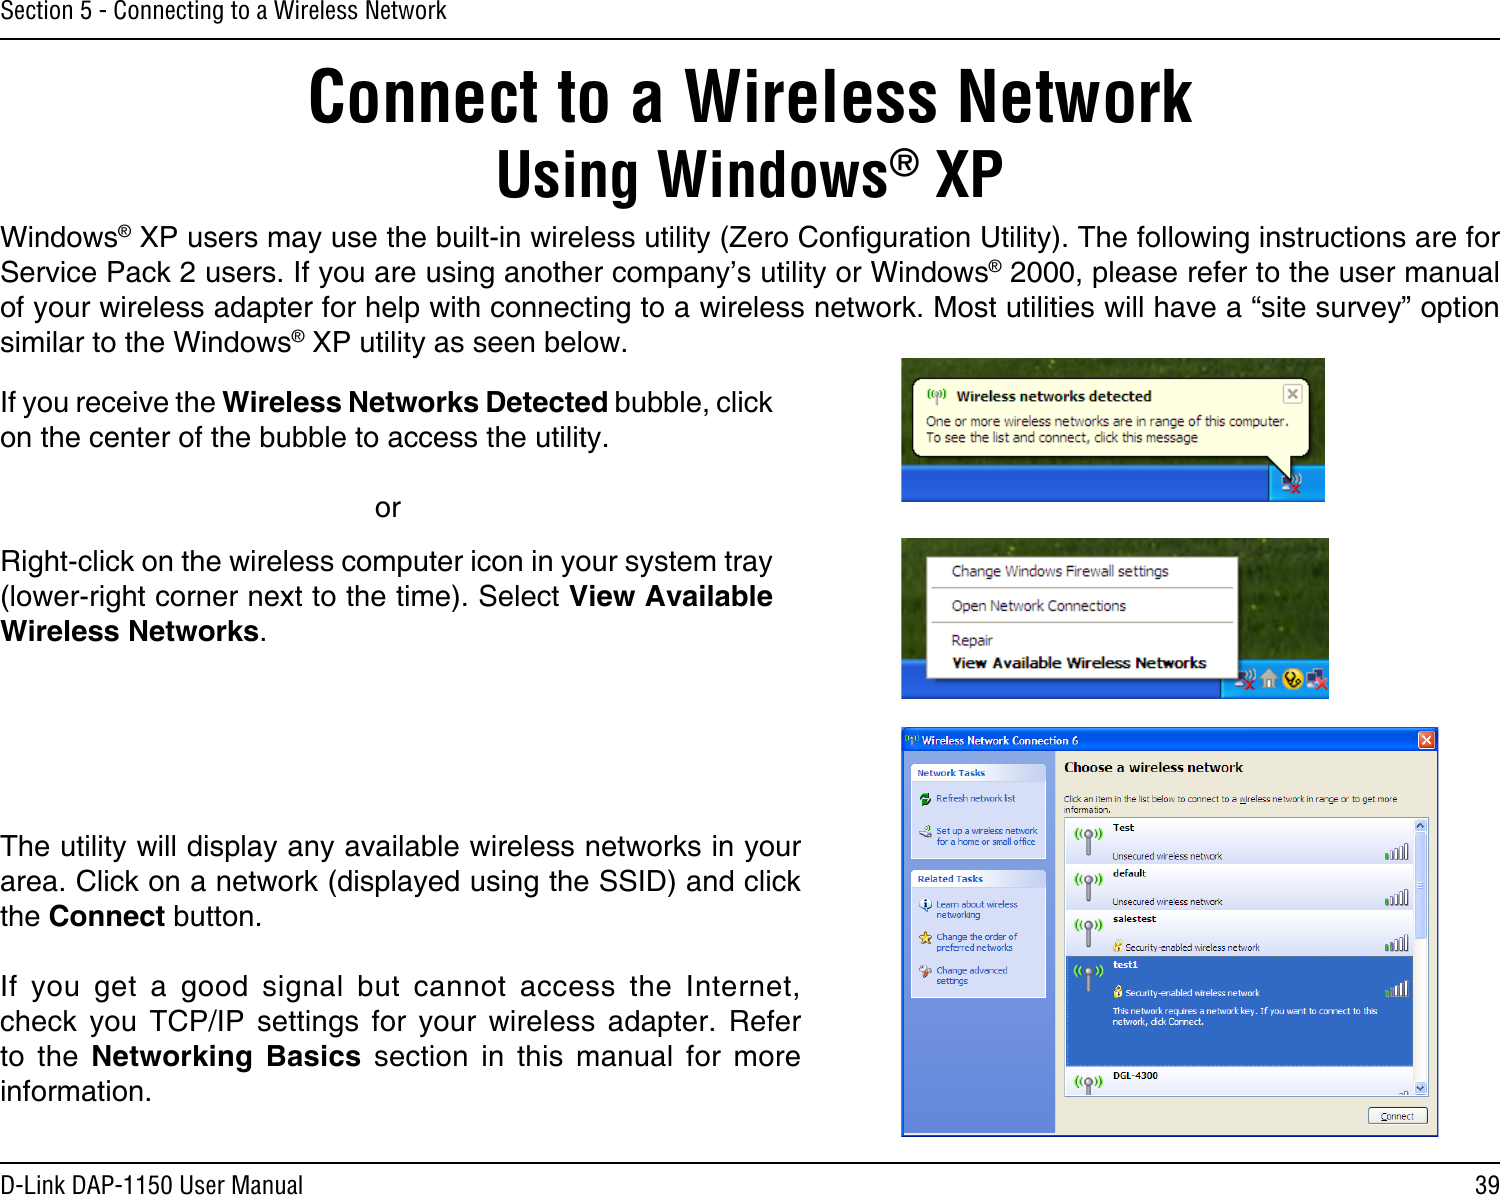 39D-Link DAP-1150 User ManualSection 5 - Connecting to a Wireless NetworkConnect to a Wireless NetworkUsing Windows® XPWindows® XP users may use the built-in wireless utility (Zero Conguration Utility). The following instructions are for Service Pack 2 users. If you are using another company’s utility or Windows® 2000, please refer to the user manual of your wireless adapter for help with connecting to a wireless network. Most utilities will have a “site survey” option similar to the Windows® XP utility as seen below.Right-click on the wireless computer icon in your system tray (lower-right corner next to the time). Select View Available Wireless Networks.If you receive the Wireless Networks Detected bubble, click on the center of the bubble to access the utility.     orThe utility will display any available wireless networks in your area. Click on a network (displayed using the SSID) and click the Connect button.If  you  get  a  good  signal  but  cannot  access  the  Internet, check  you  TCP/IP  settings  for  your  wireless  adapter.  Refer to  the  Networking  Basics  section  in  this  manual  for  more information.